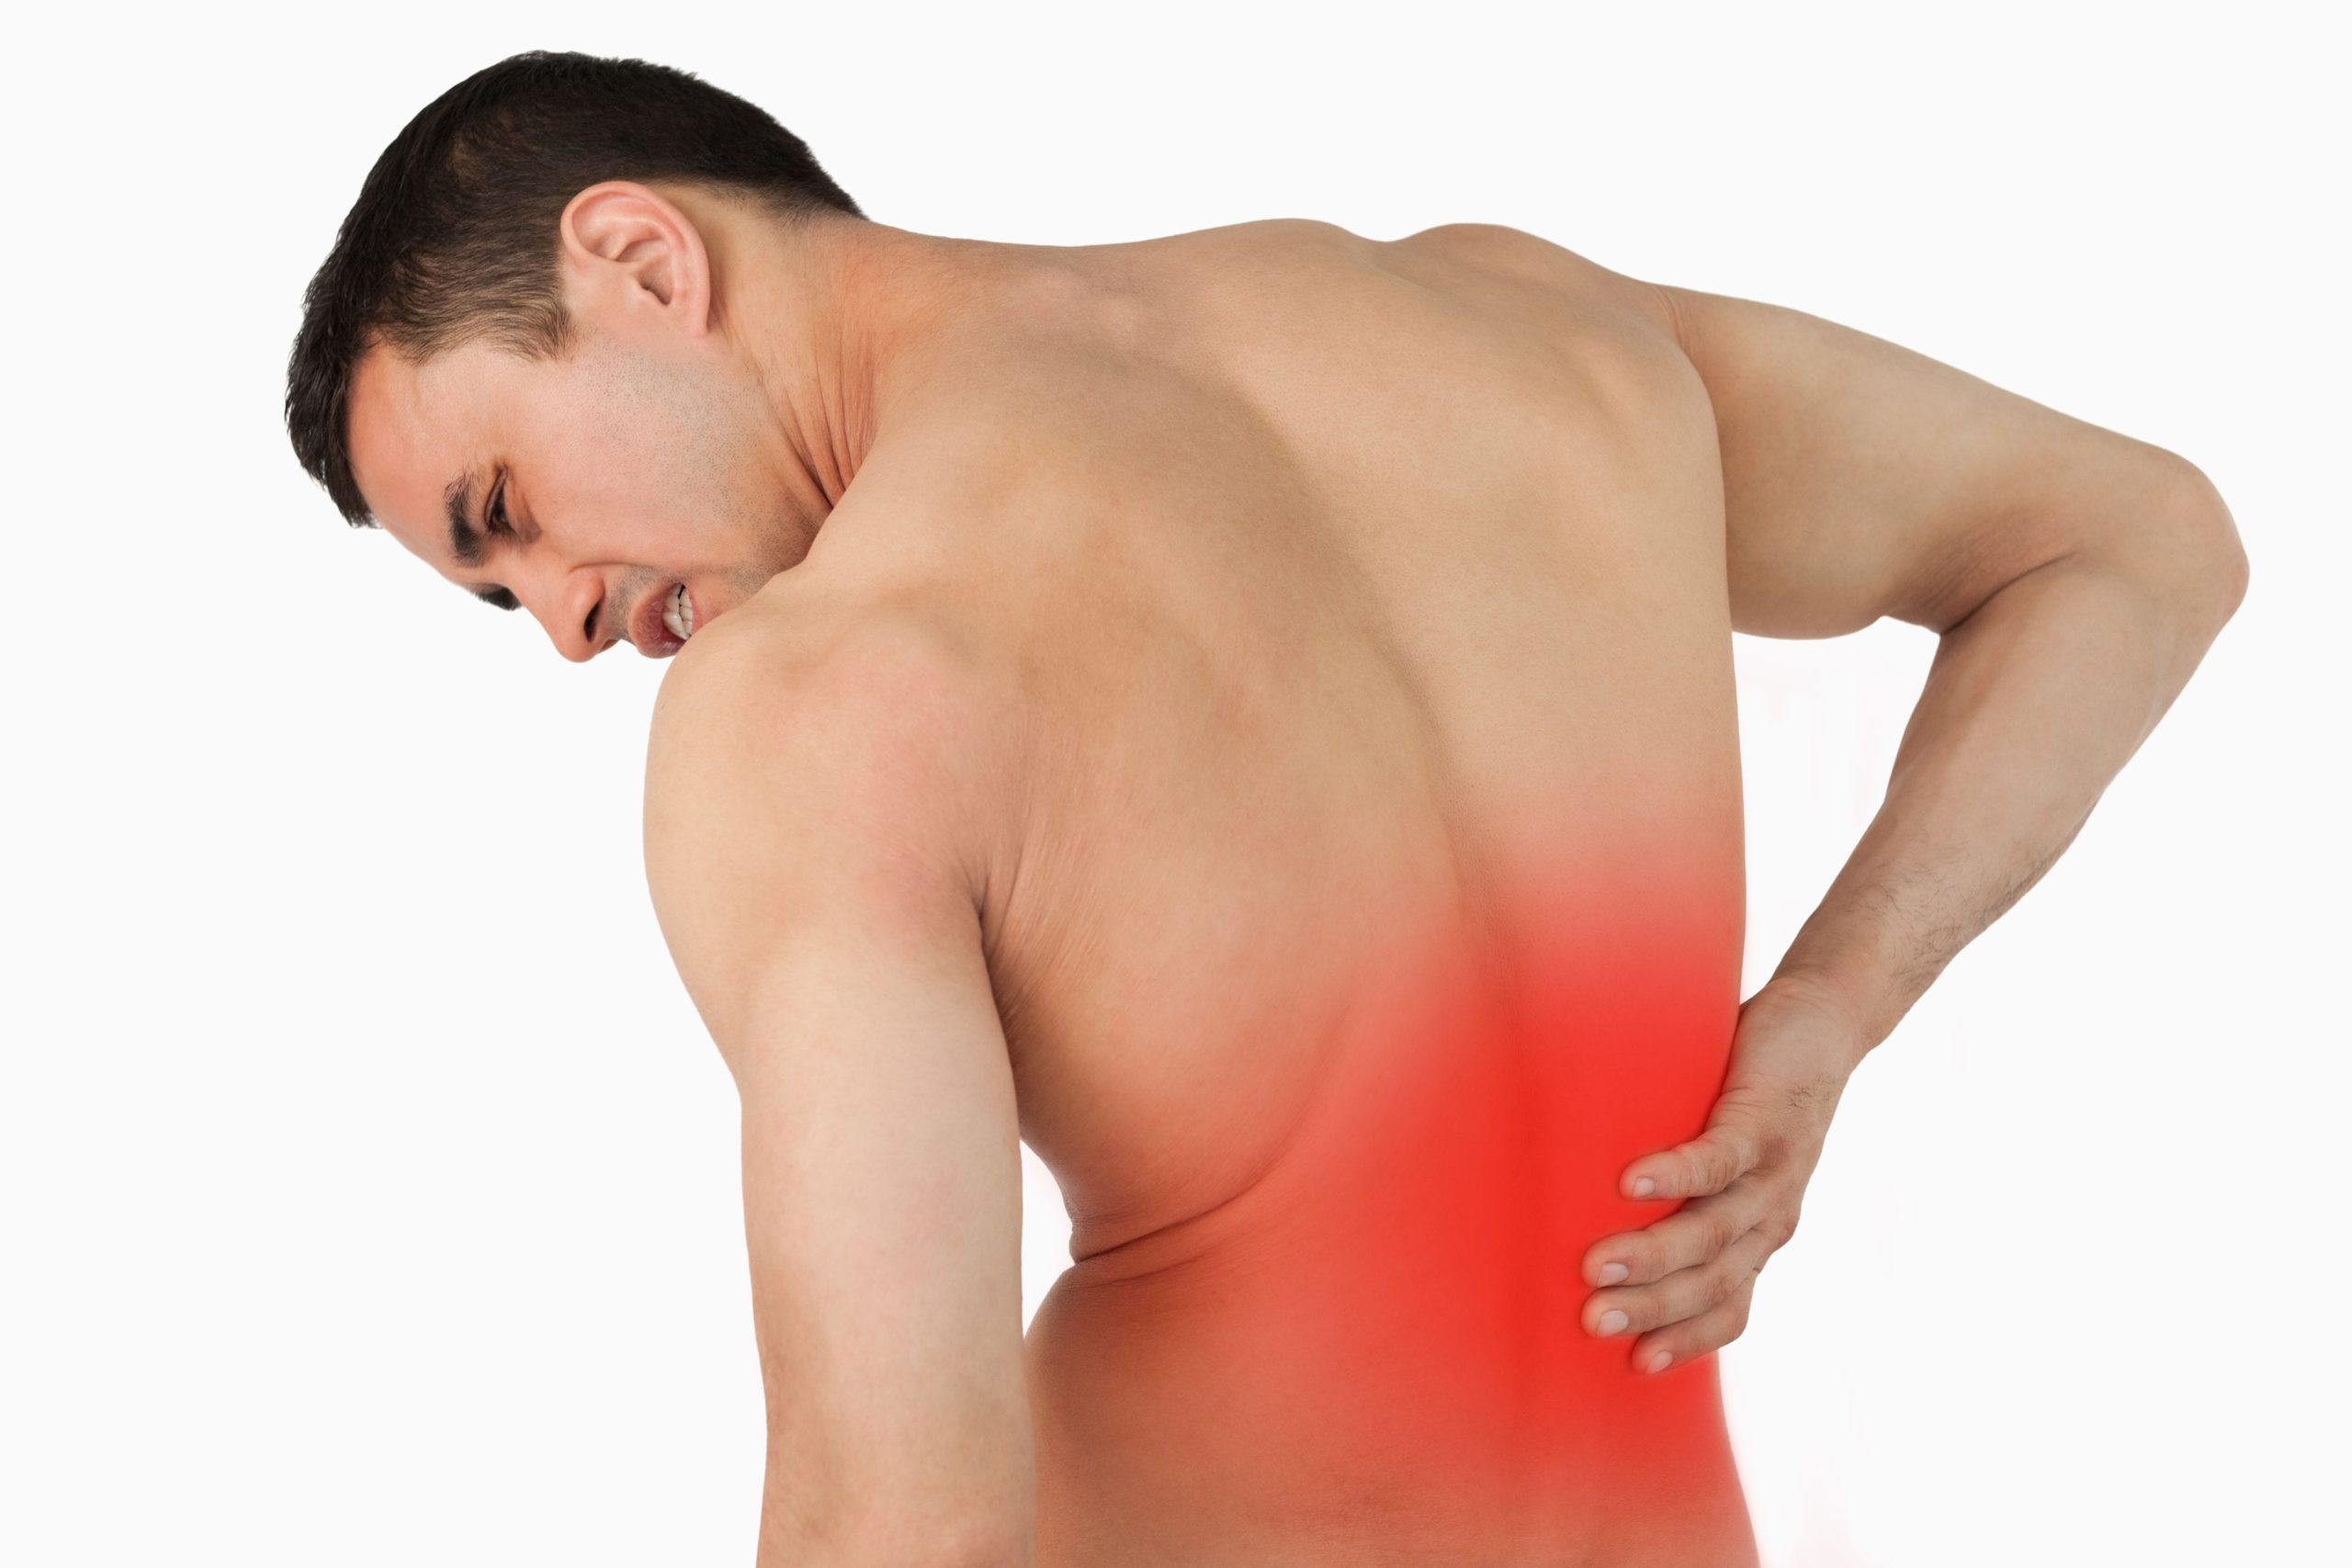 Chronic Back Pain Treatments That Get Results